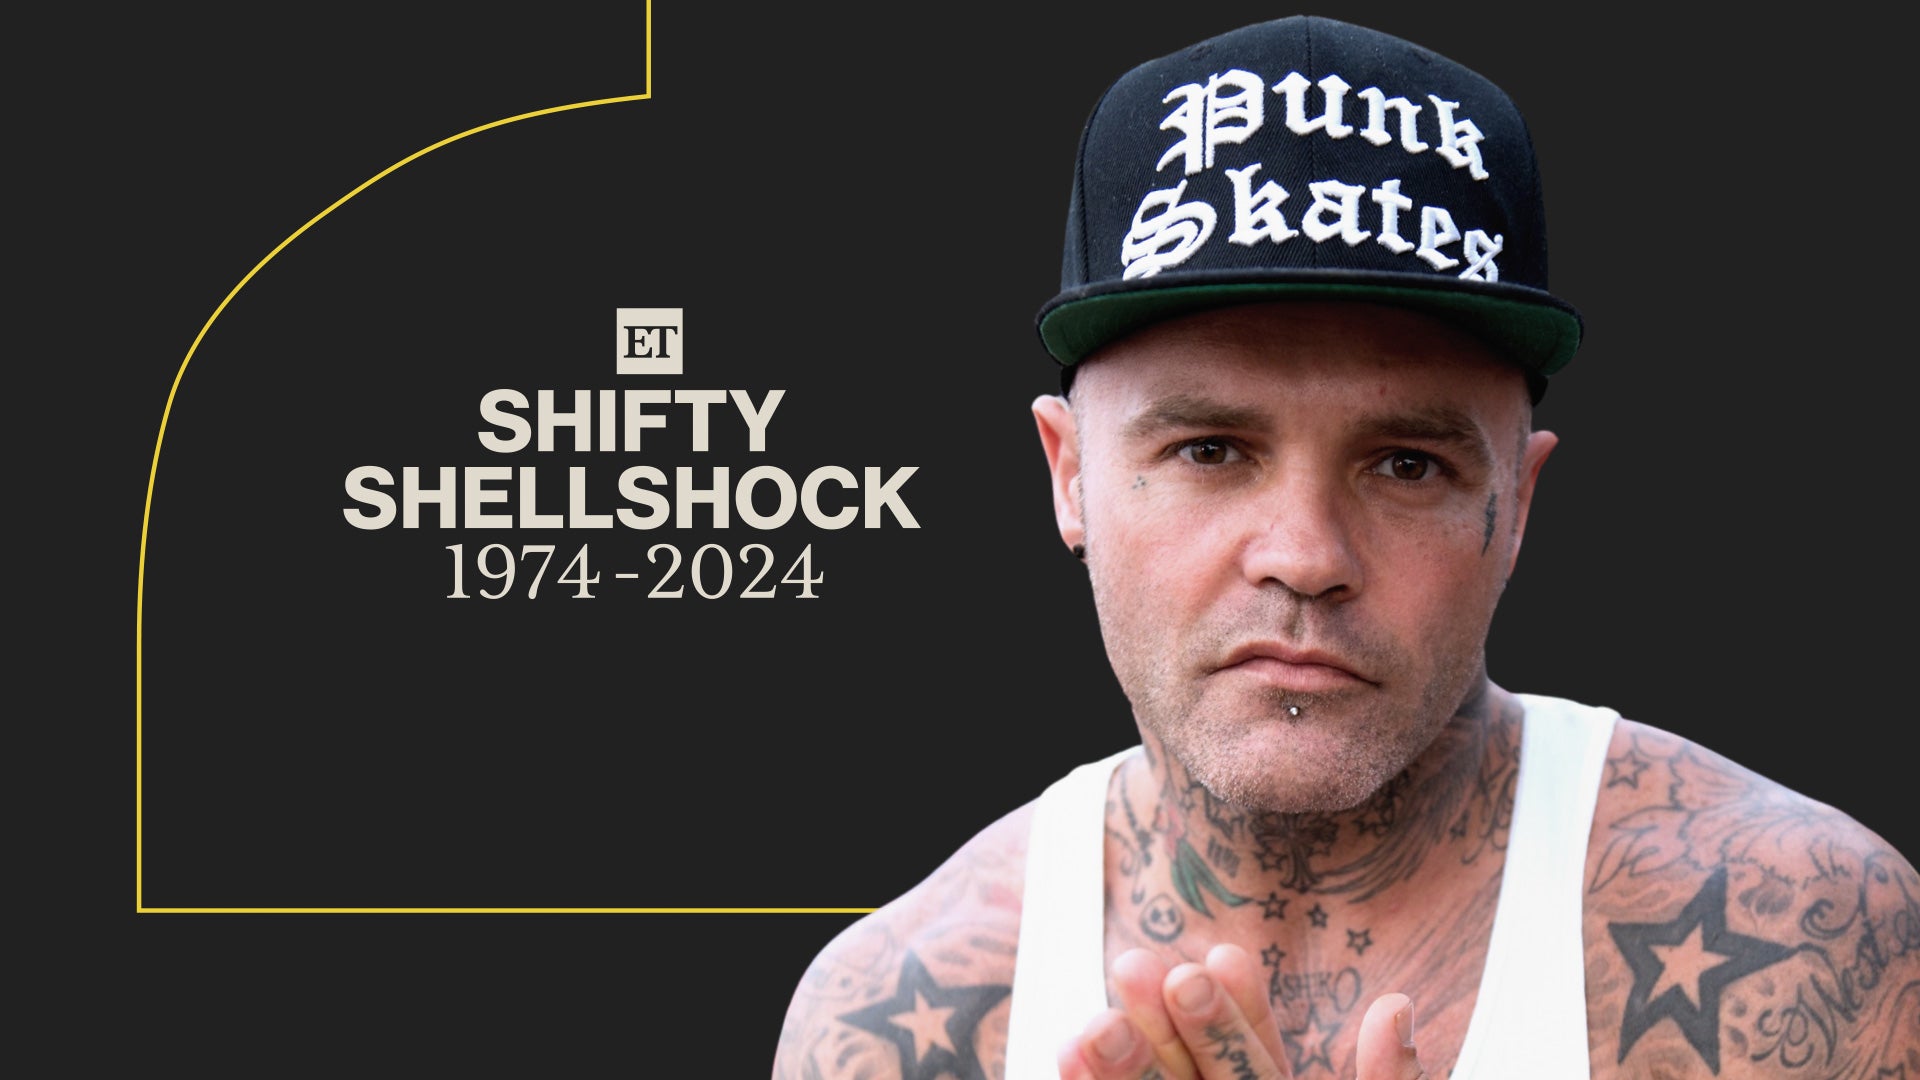 Shifty Shellshock, Crazy Town Frontman and 'Butterfly' Singer, Dead at 49